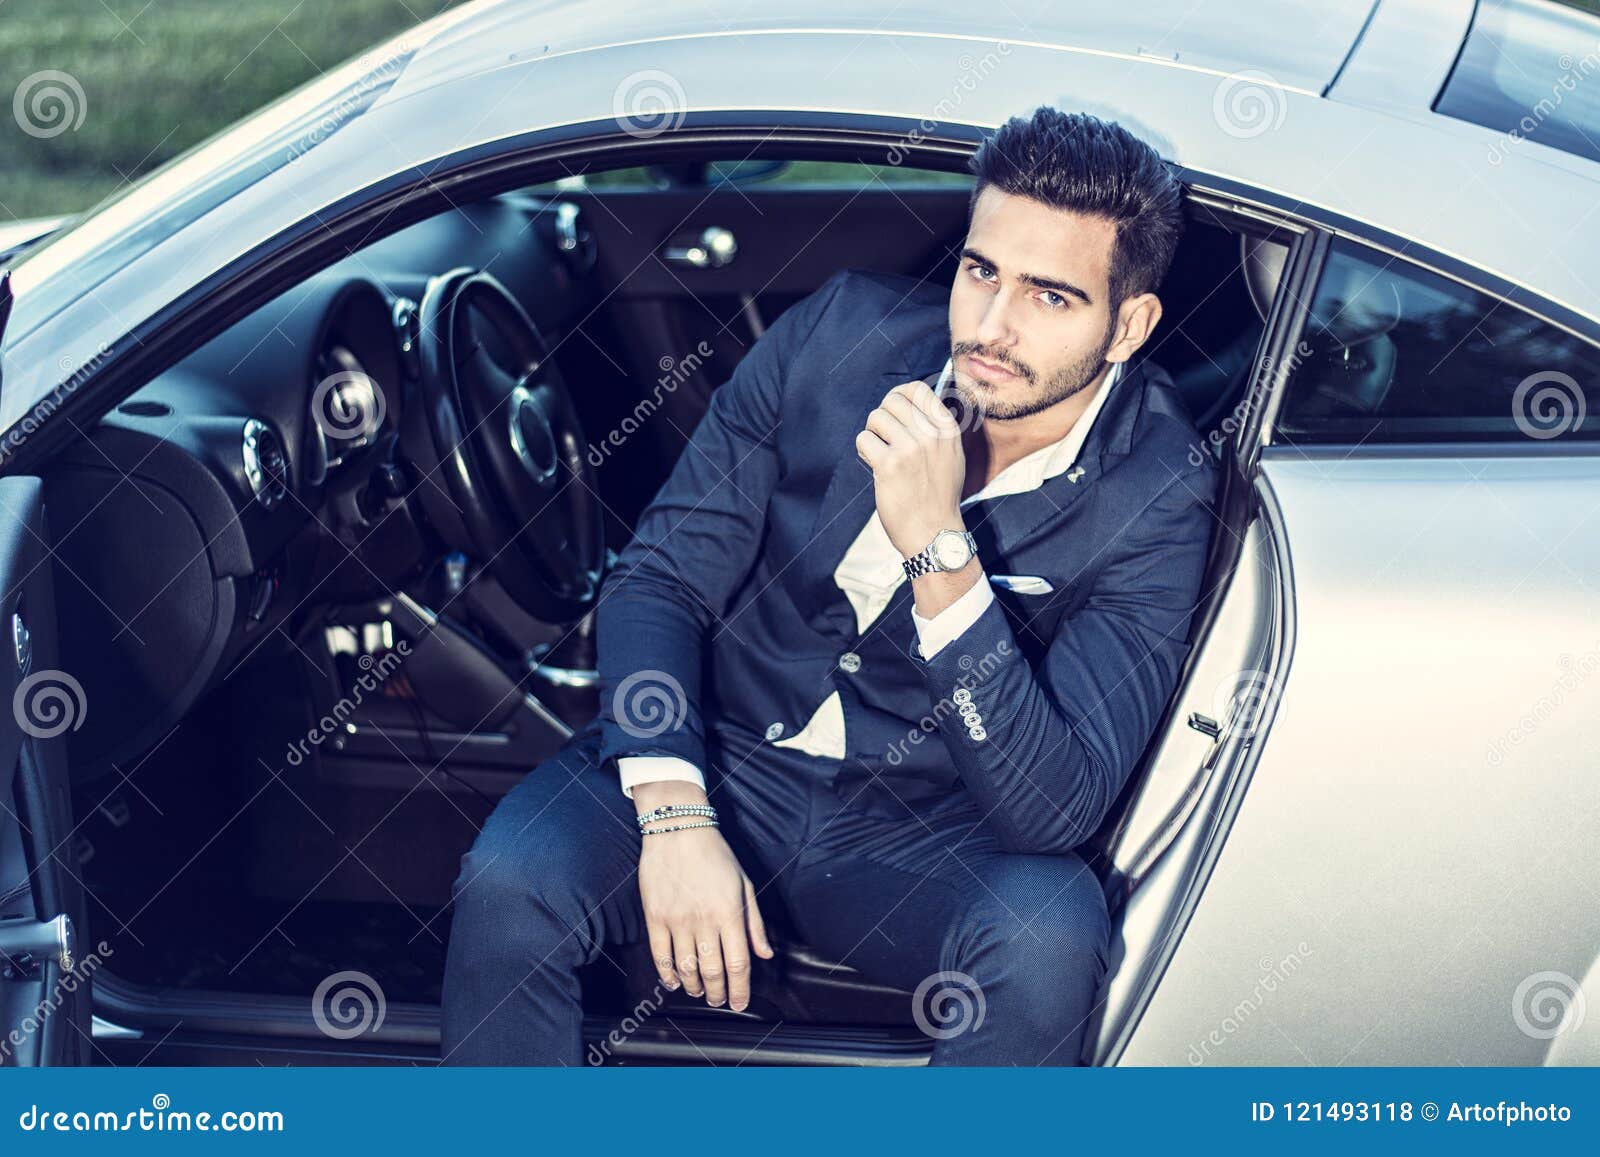 Shoaib Ibrahim poses with his Toyota Fortuner car Photo